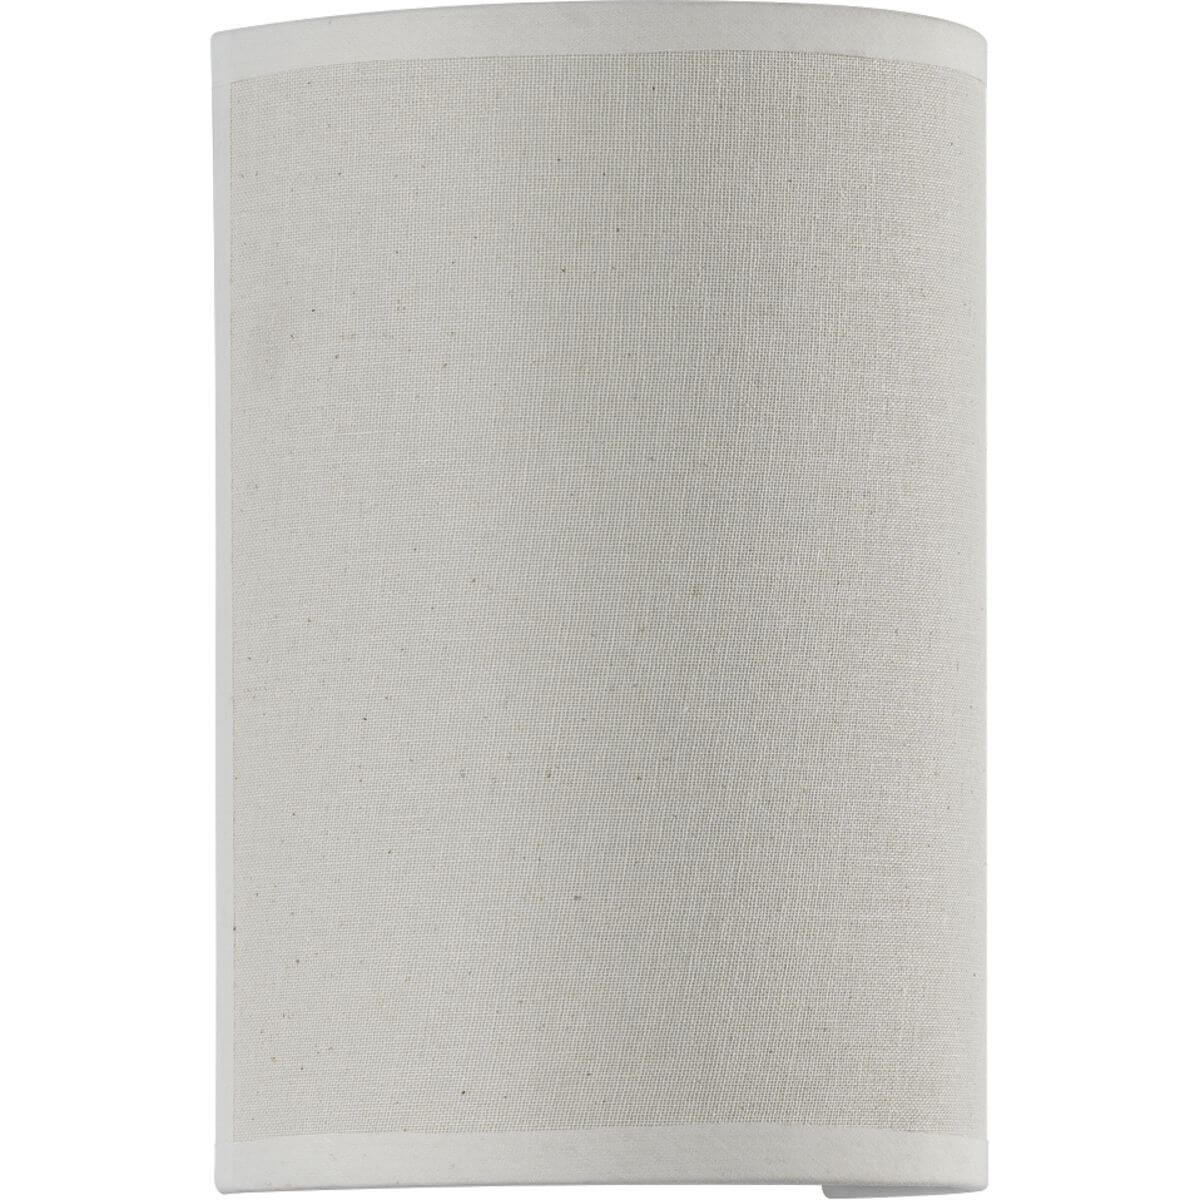 Progress Lighting P710071-159-30 Inspire 1 Light 9 inch Tall LED Wall Sconce with Off White Linen Shade